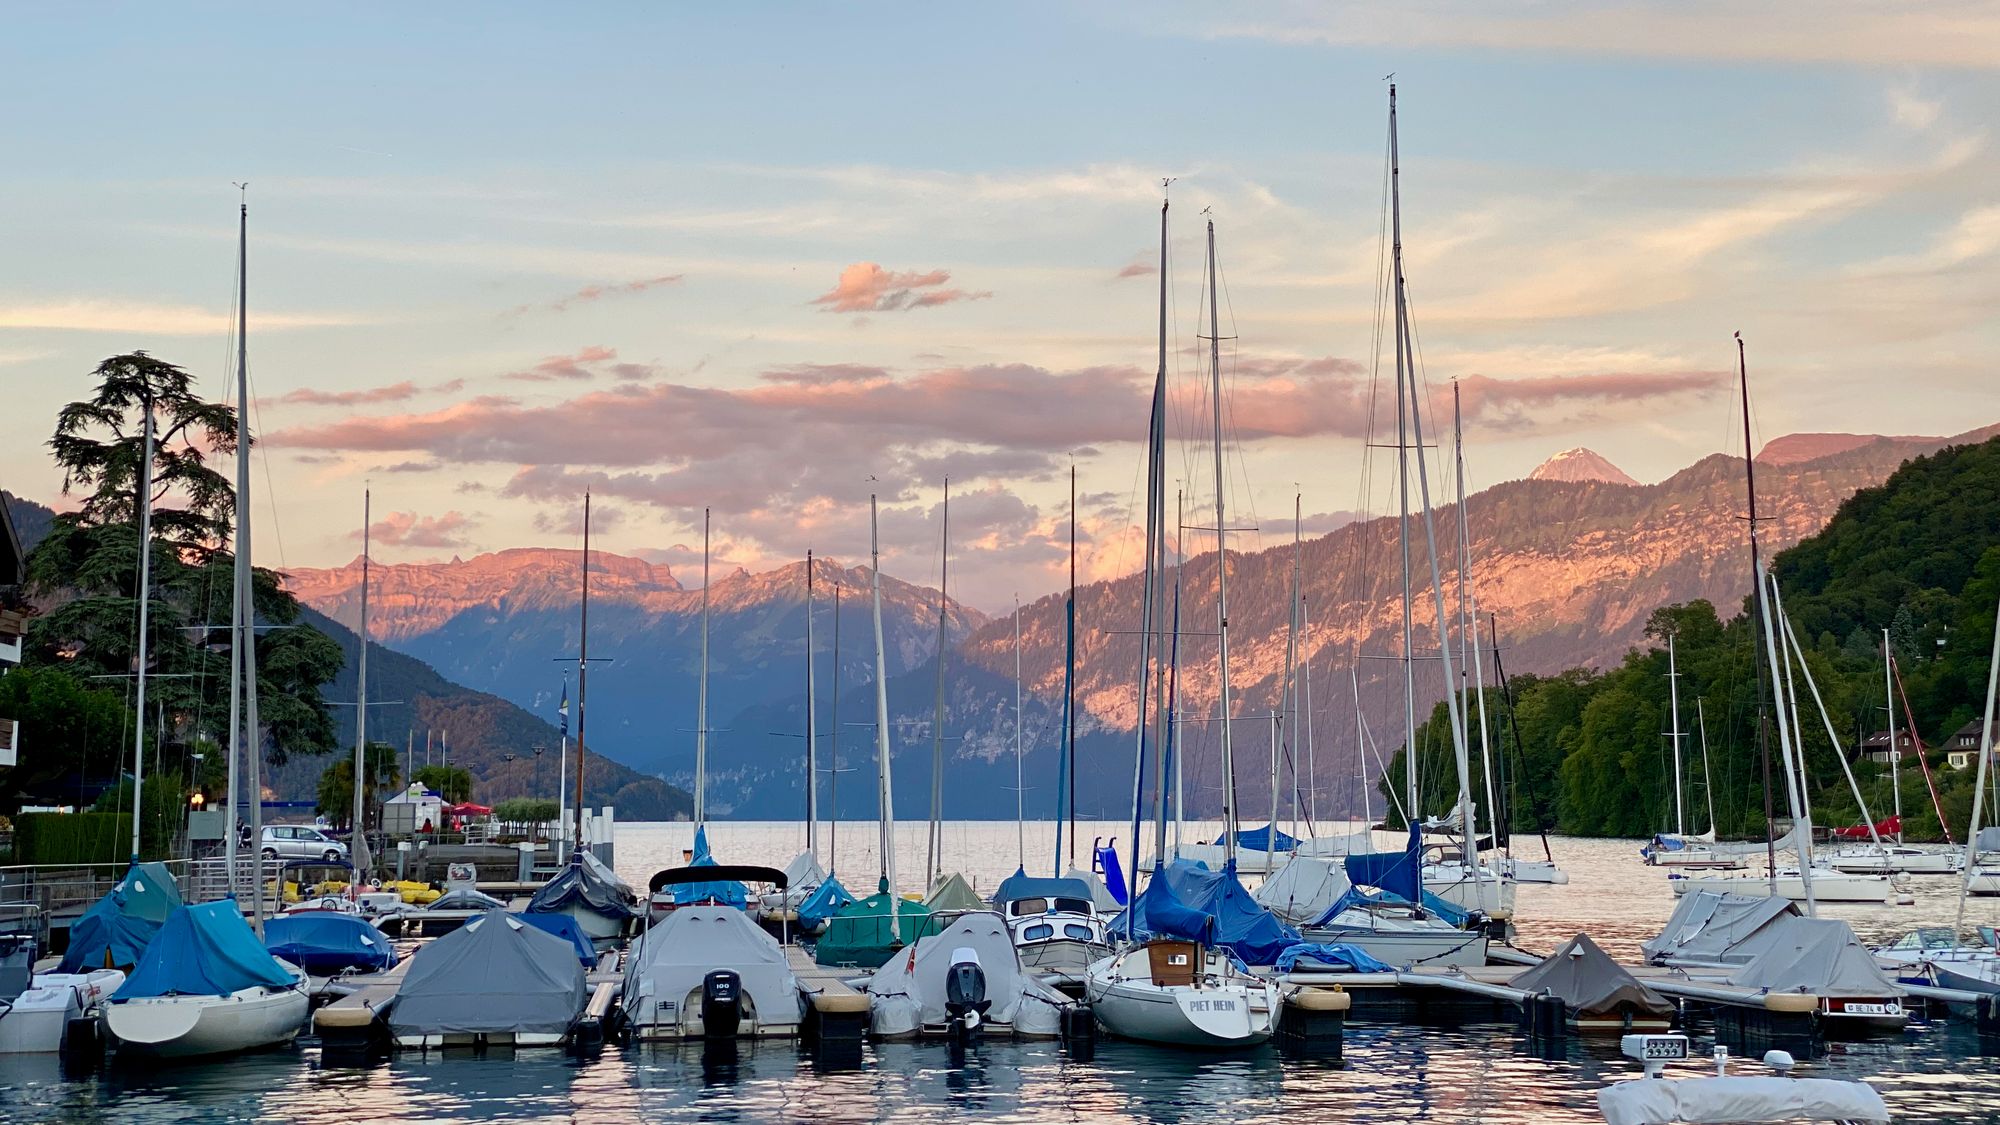 Sunset over the maring in Spiez